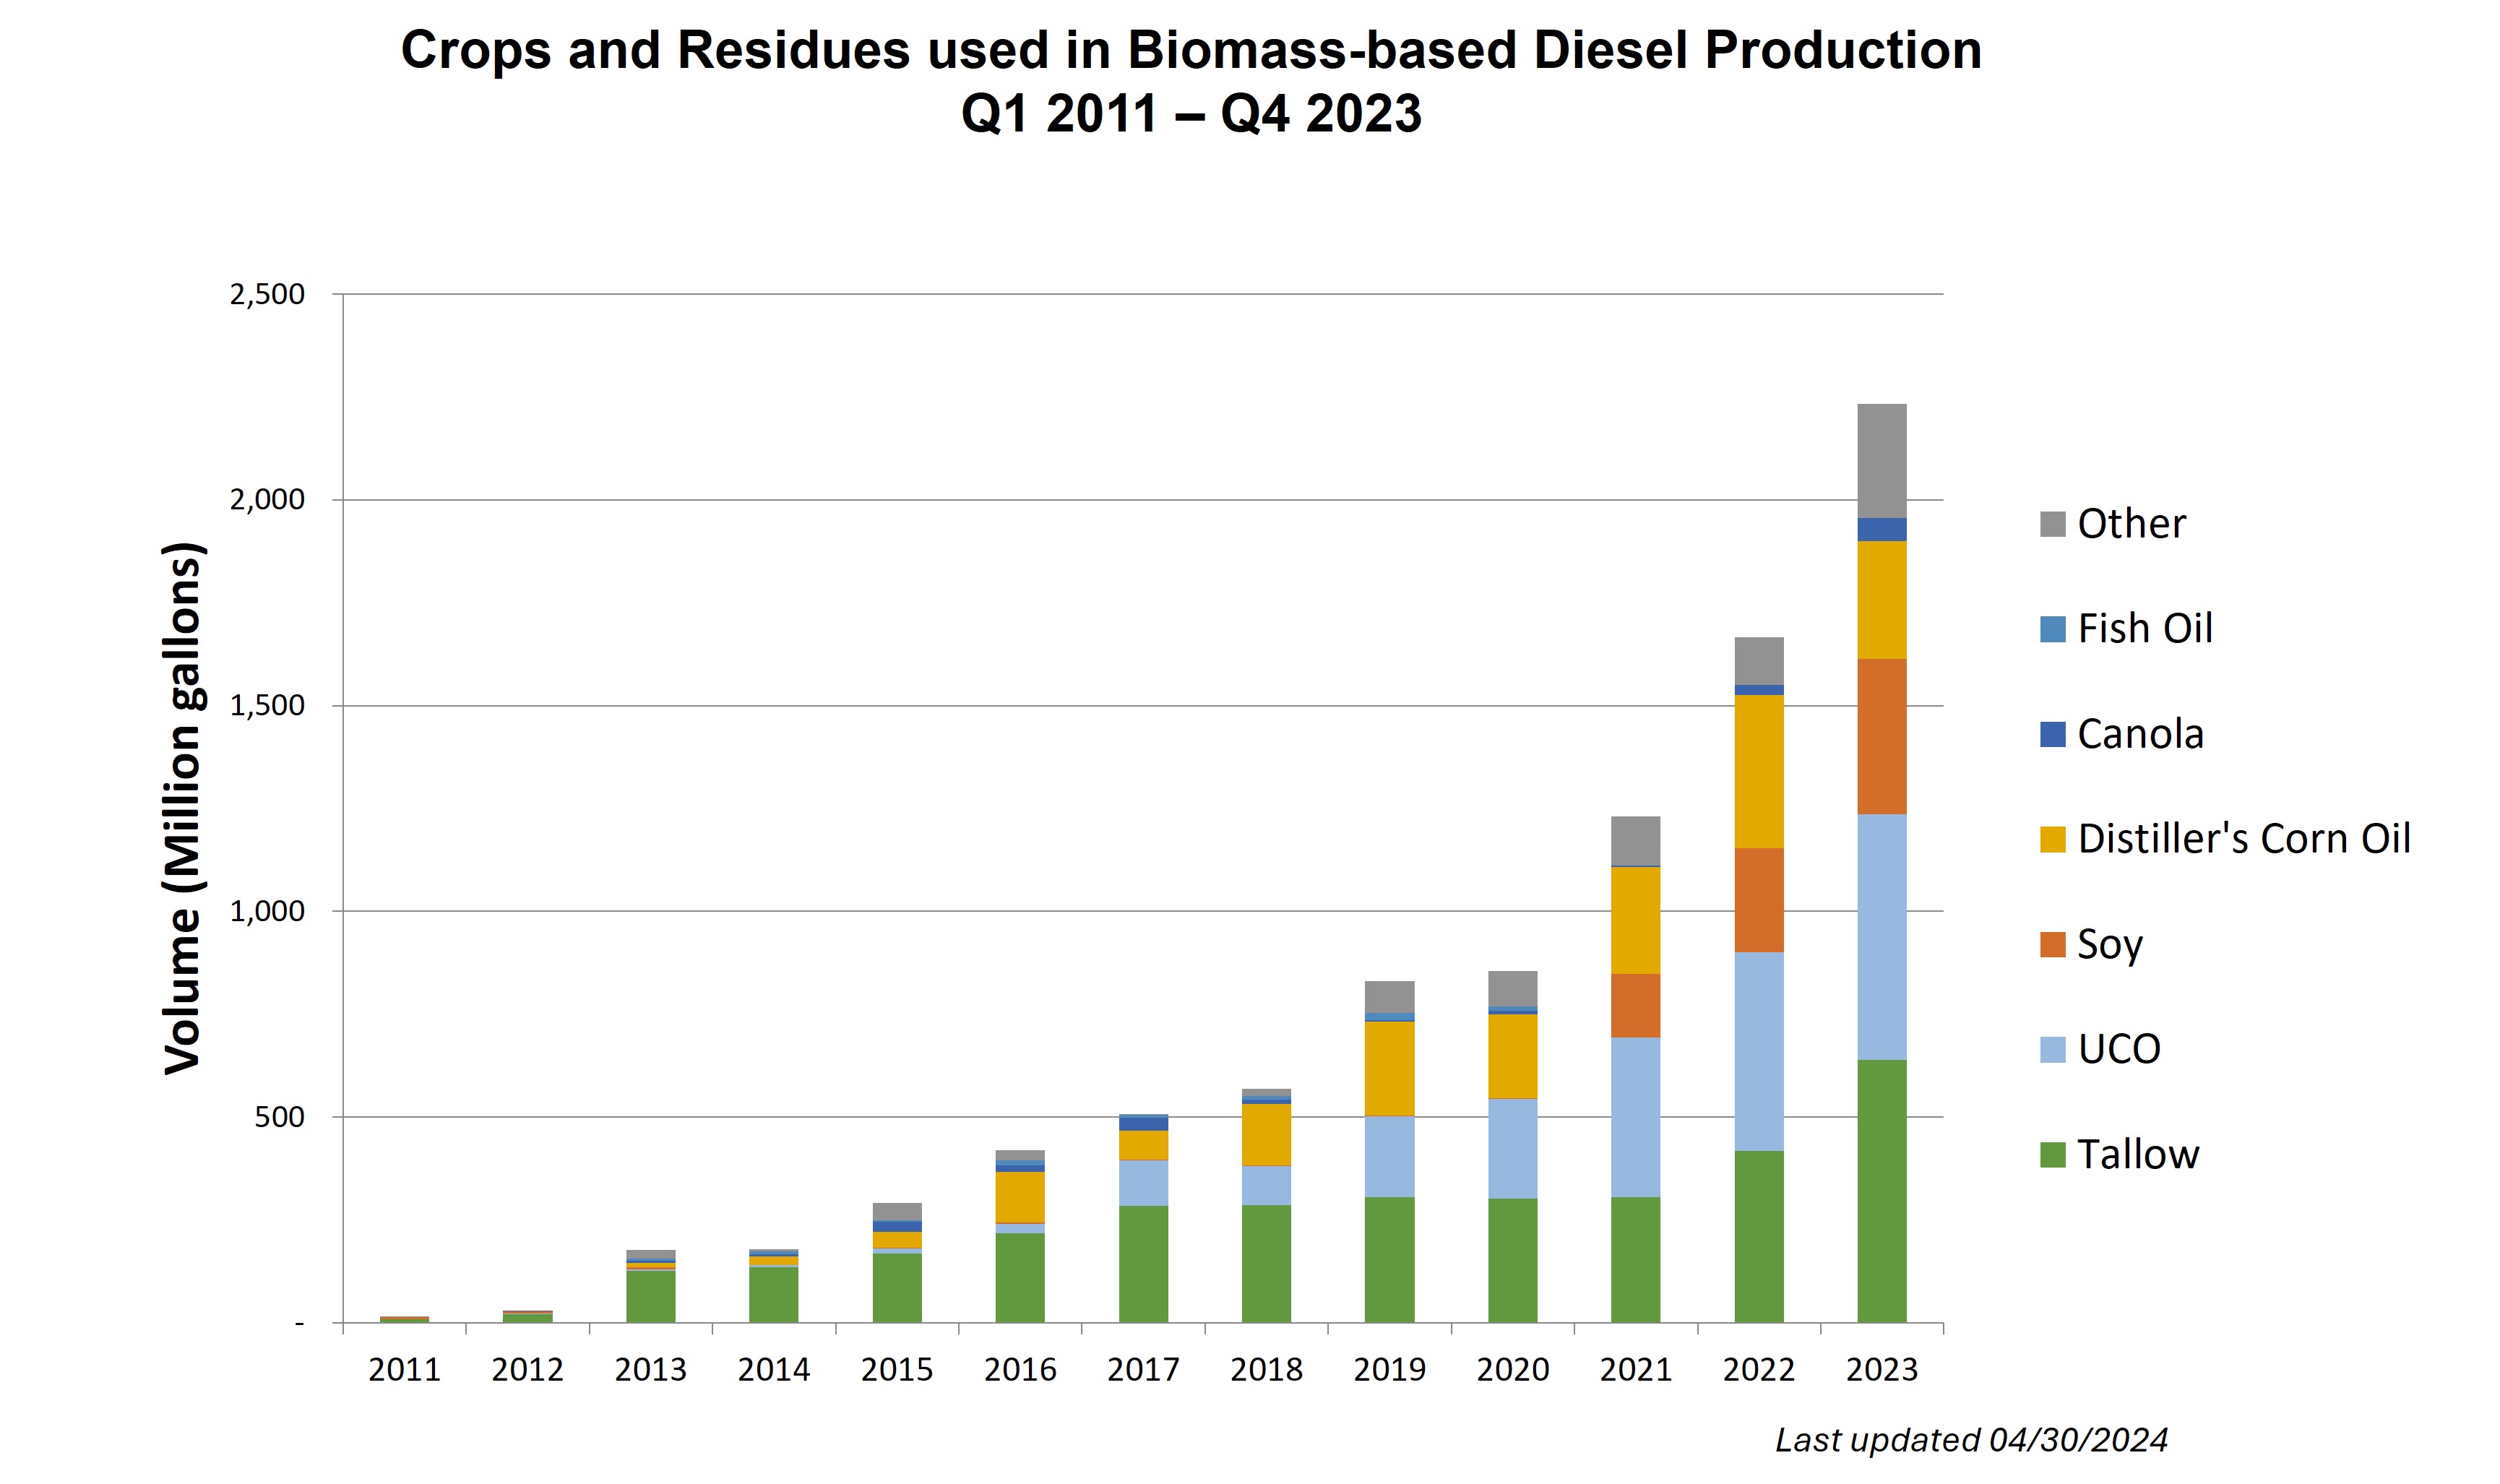 Crops and Residues used in Biomass-based Diesel Production 2011-2023